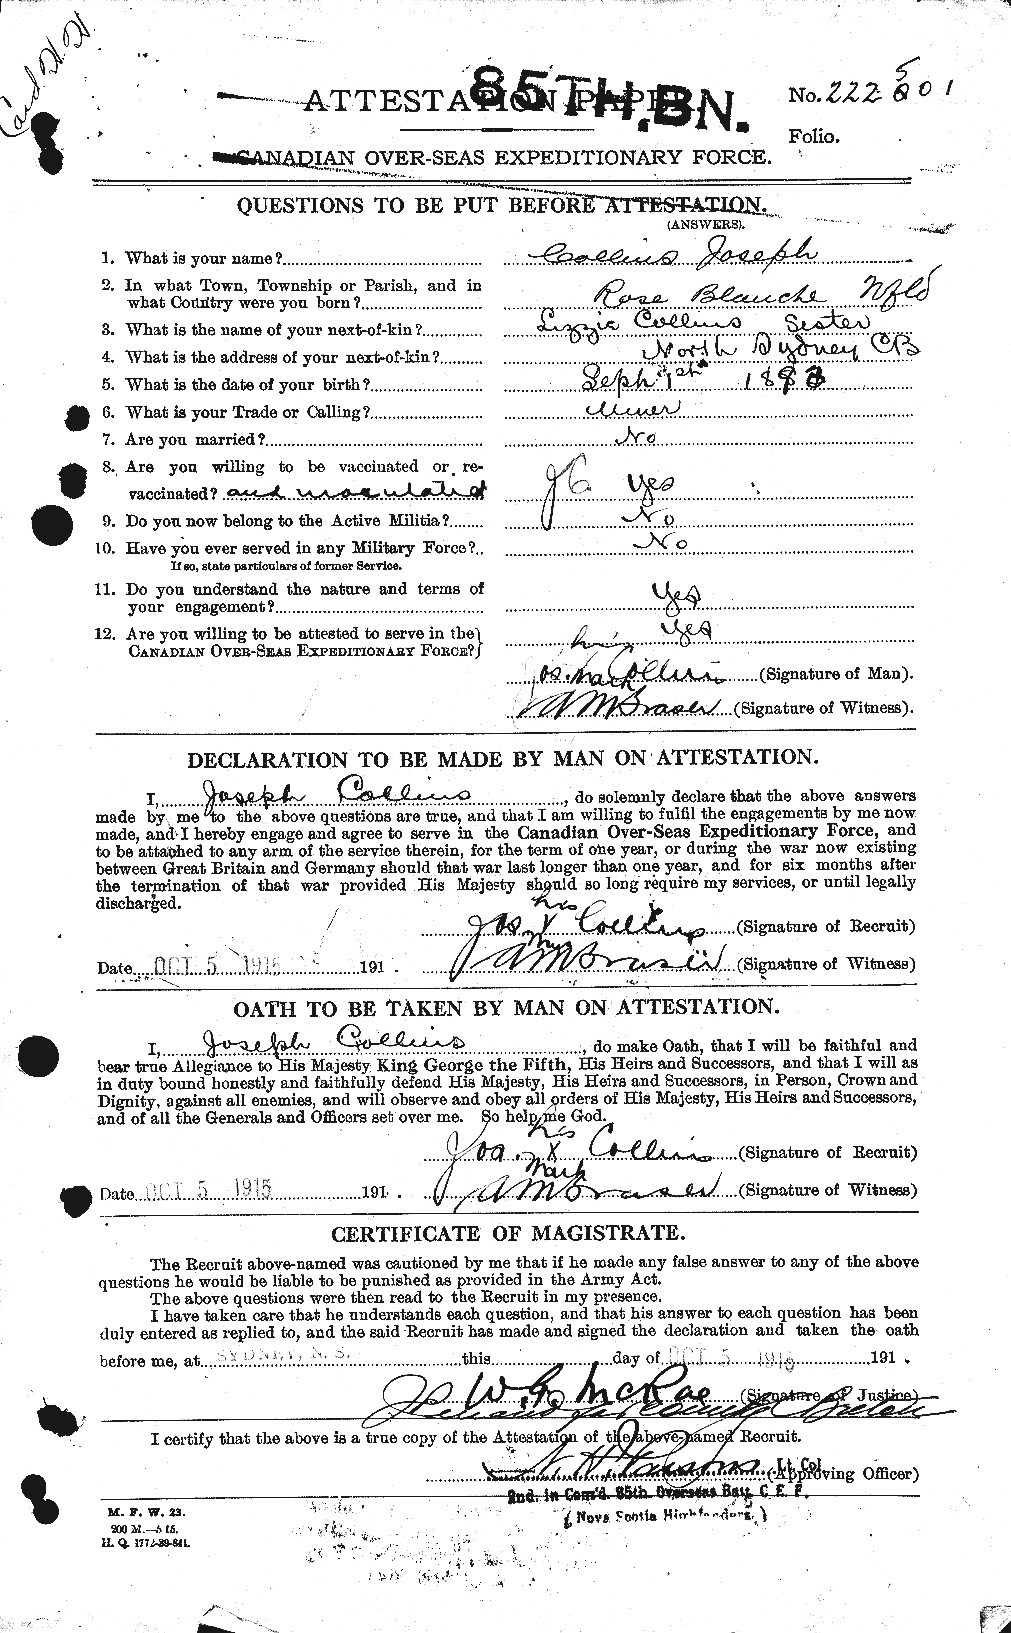 Personnel Records of the First World War - CEF 069526a